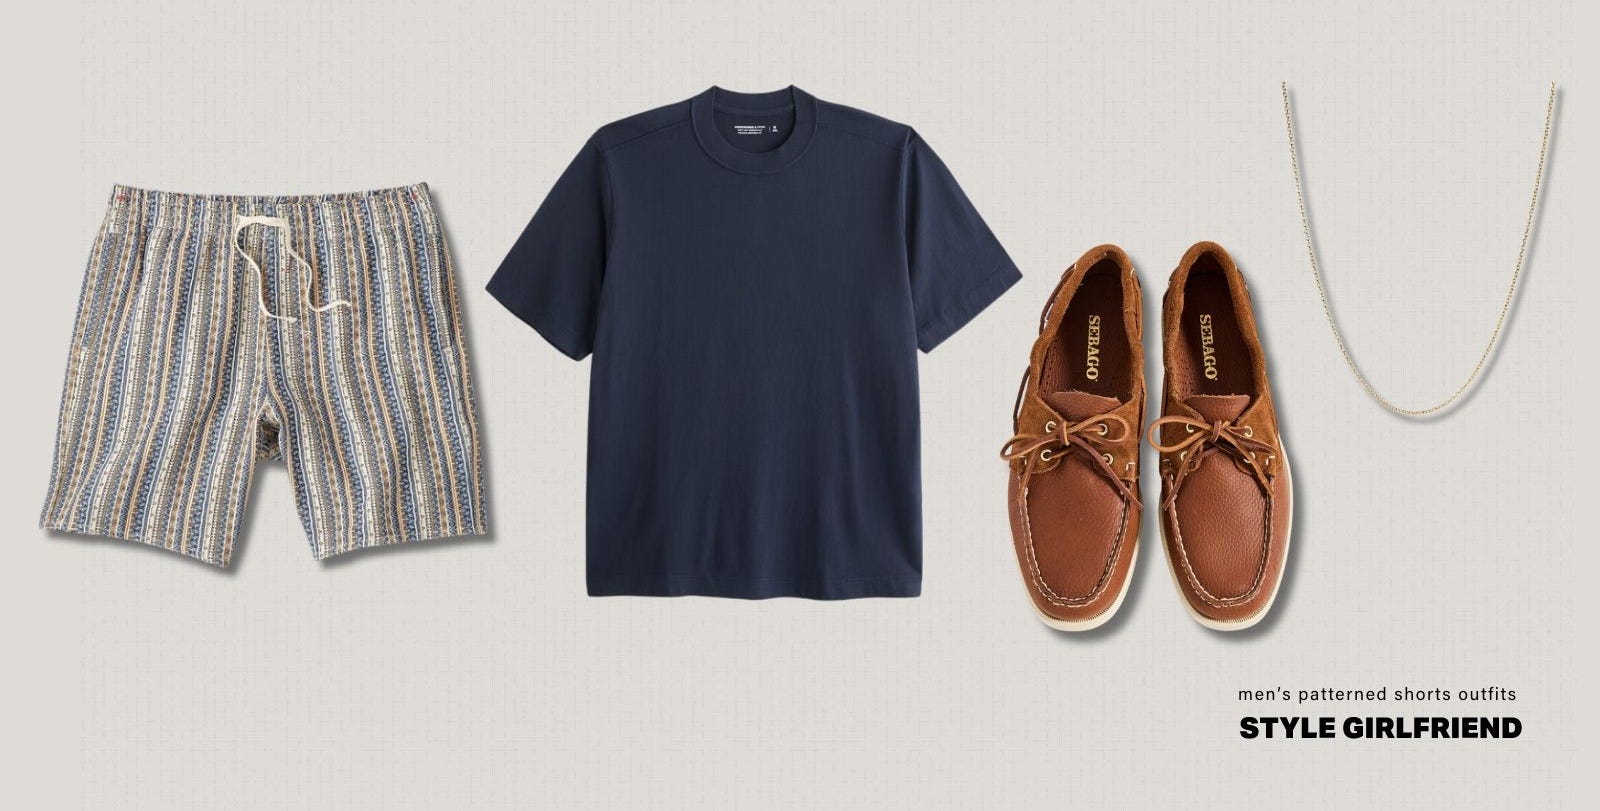 flat lay of men's warm weather outfit including patterned shorts, a navy t-shirt, boat shoes and a chain necklace